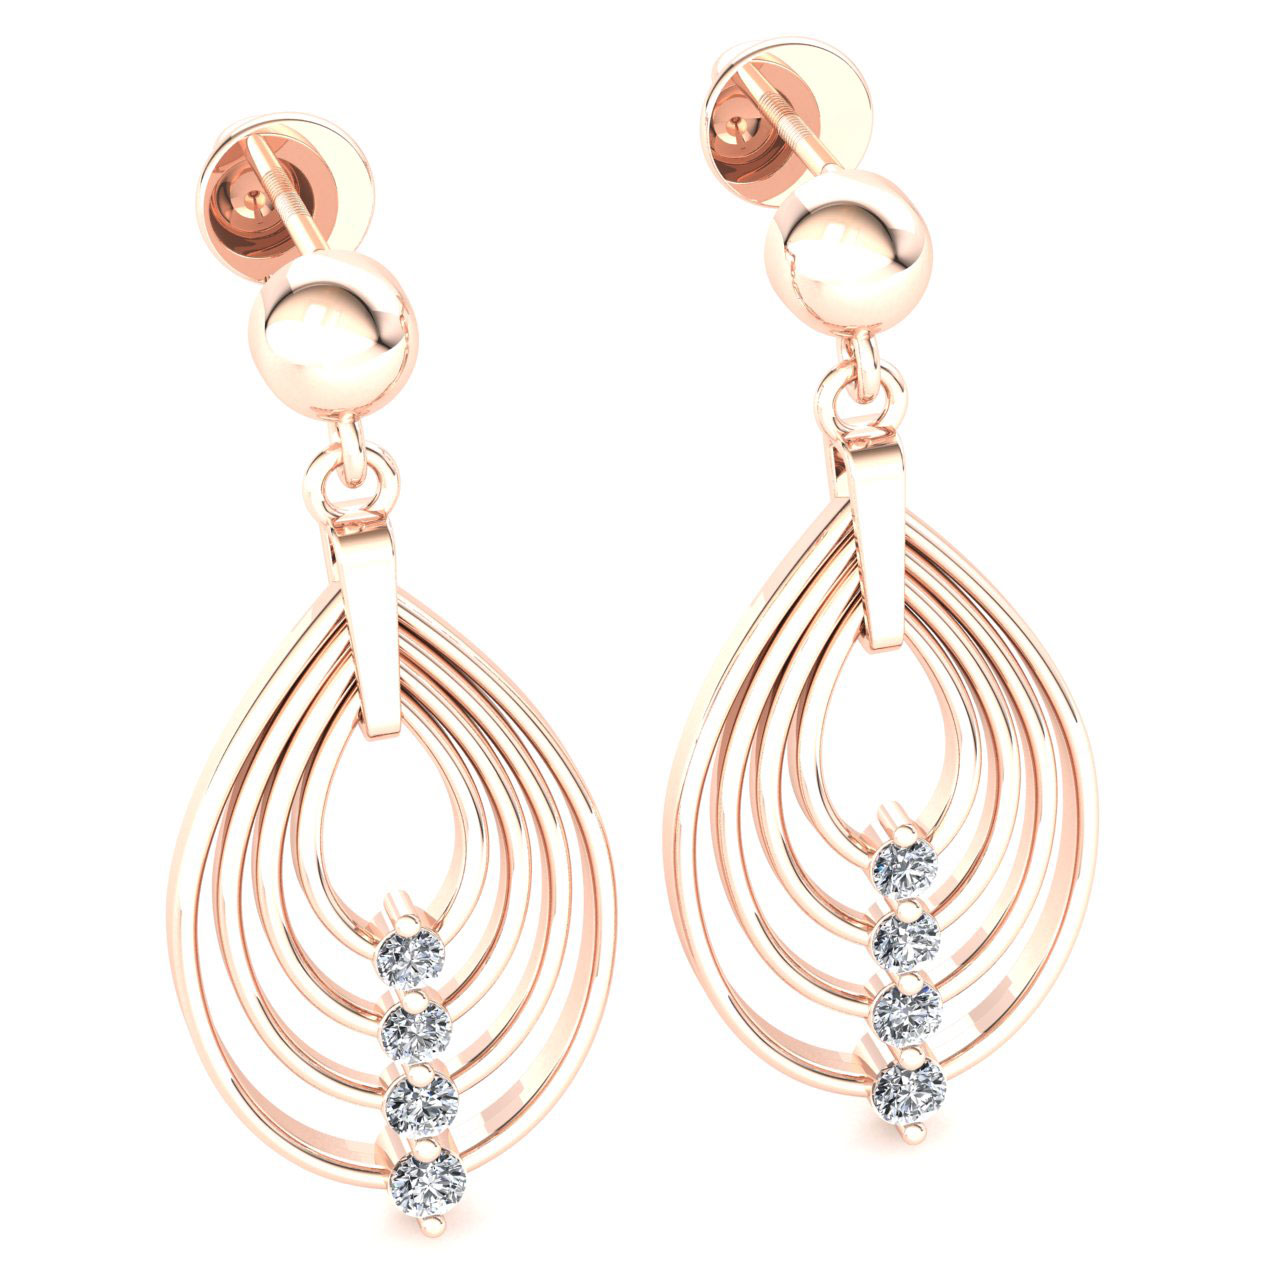 Jewel We Sell Natural 0.45ctw Round Cut Diamond Ladies Dangle Teardrop Earrings Solid 10K White, Yellow or Rose Gold J SI2